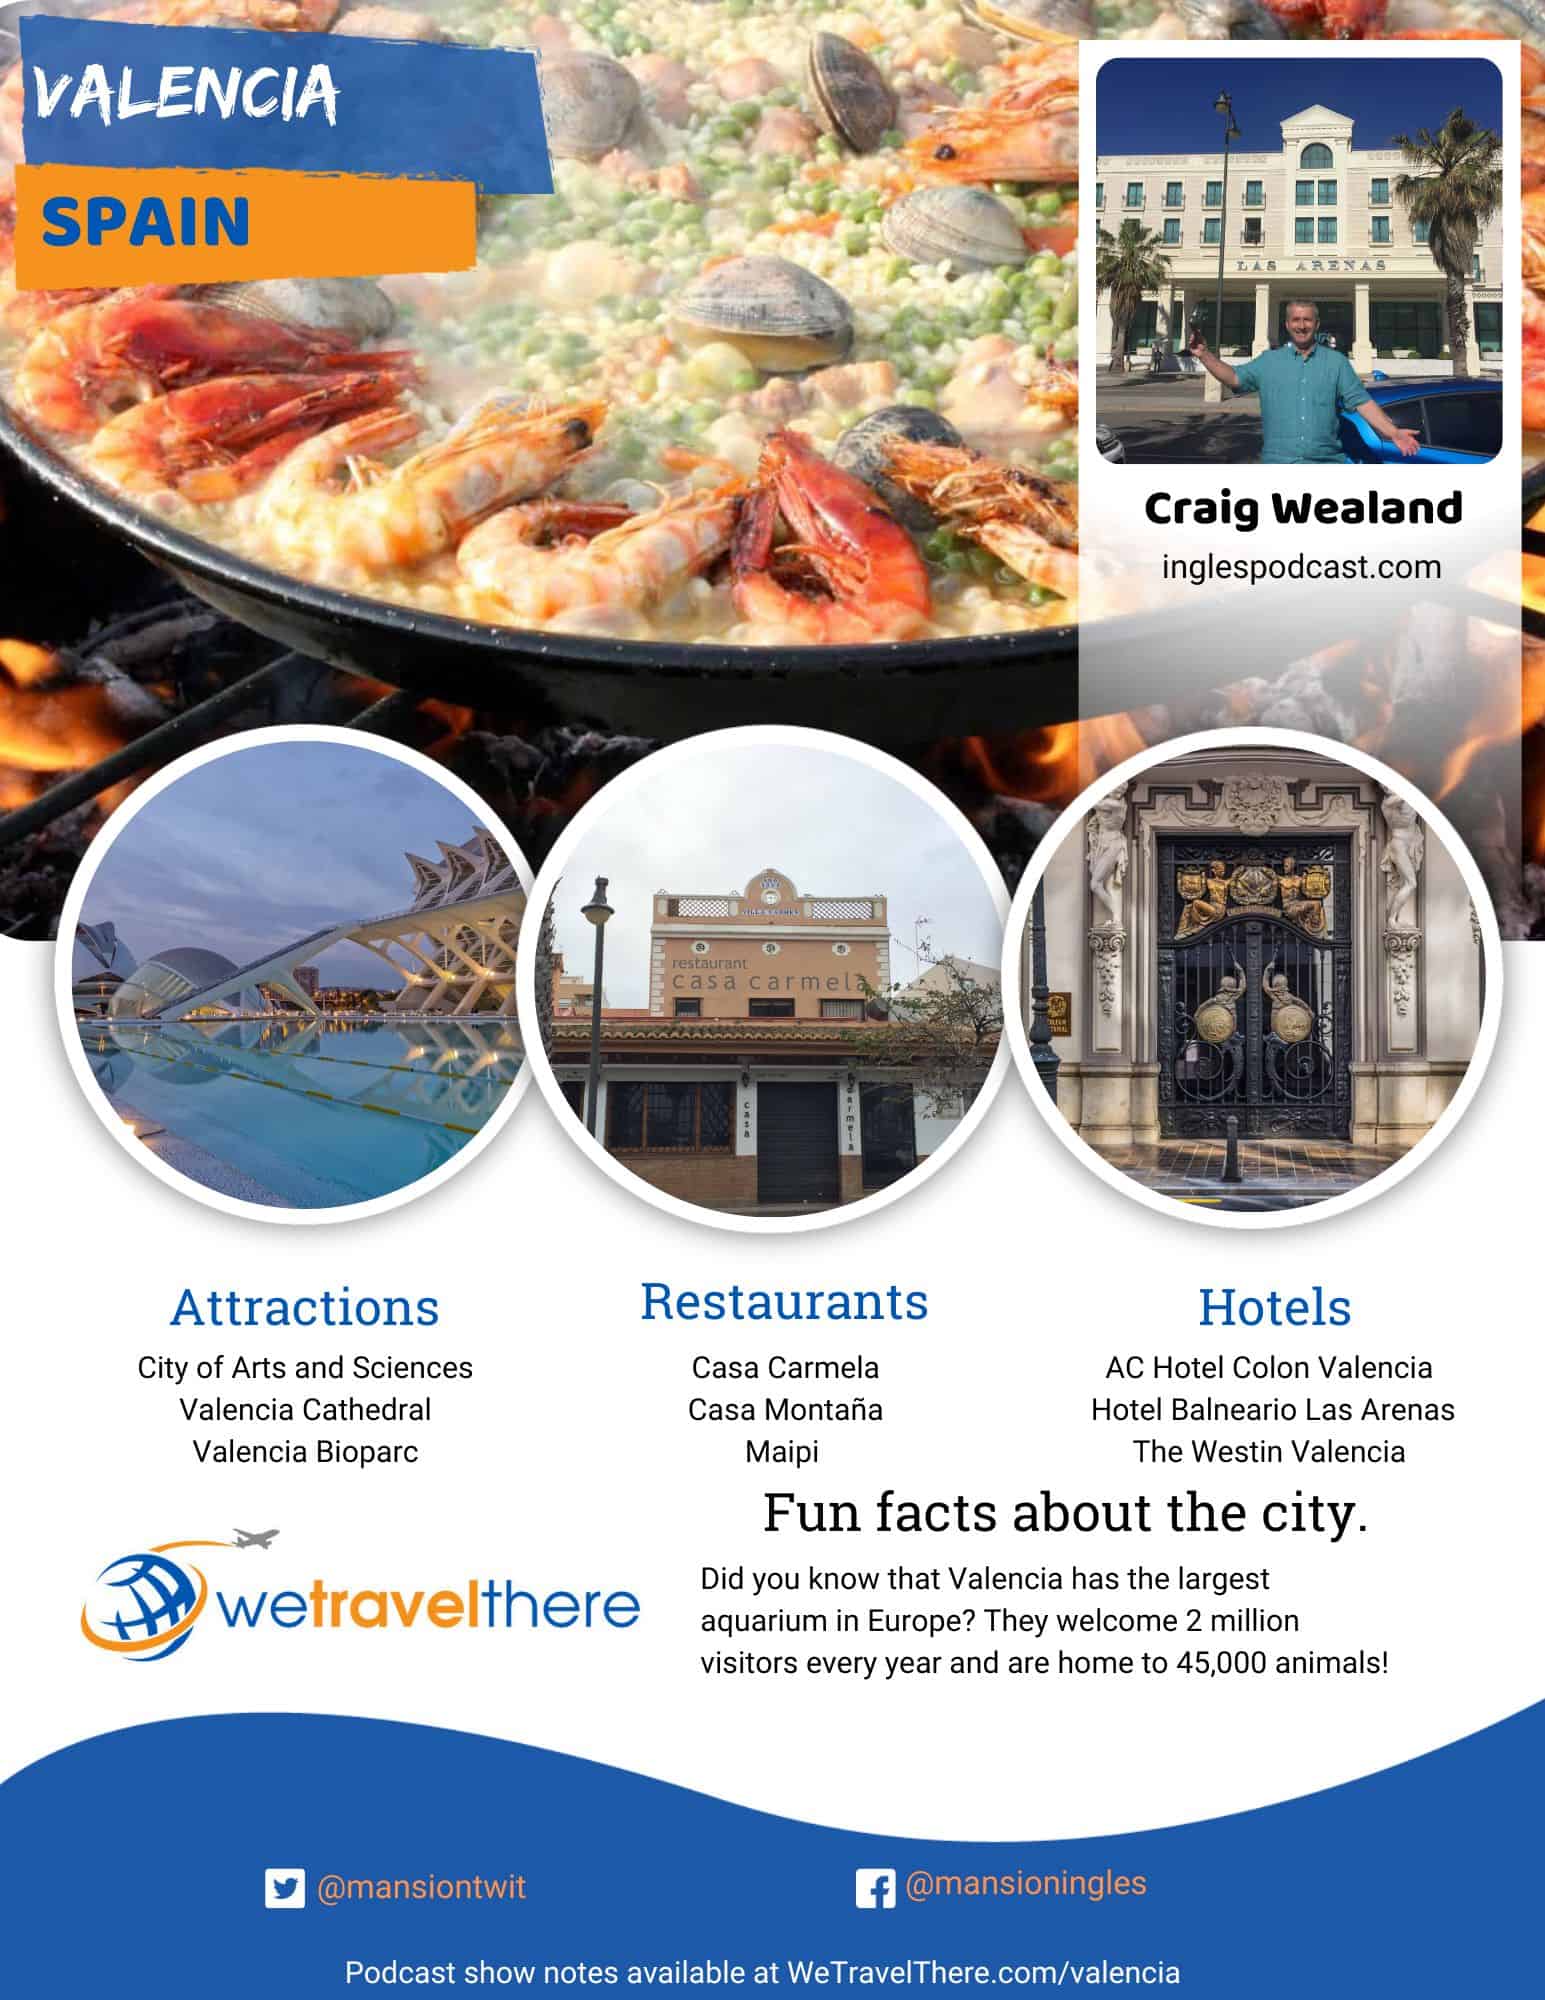 We-Travel-There-Valencia-Spain-Craig-Wealand-podcast-one-sheet